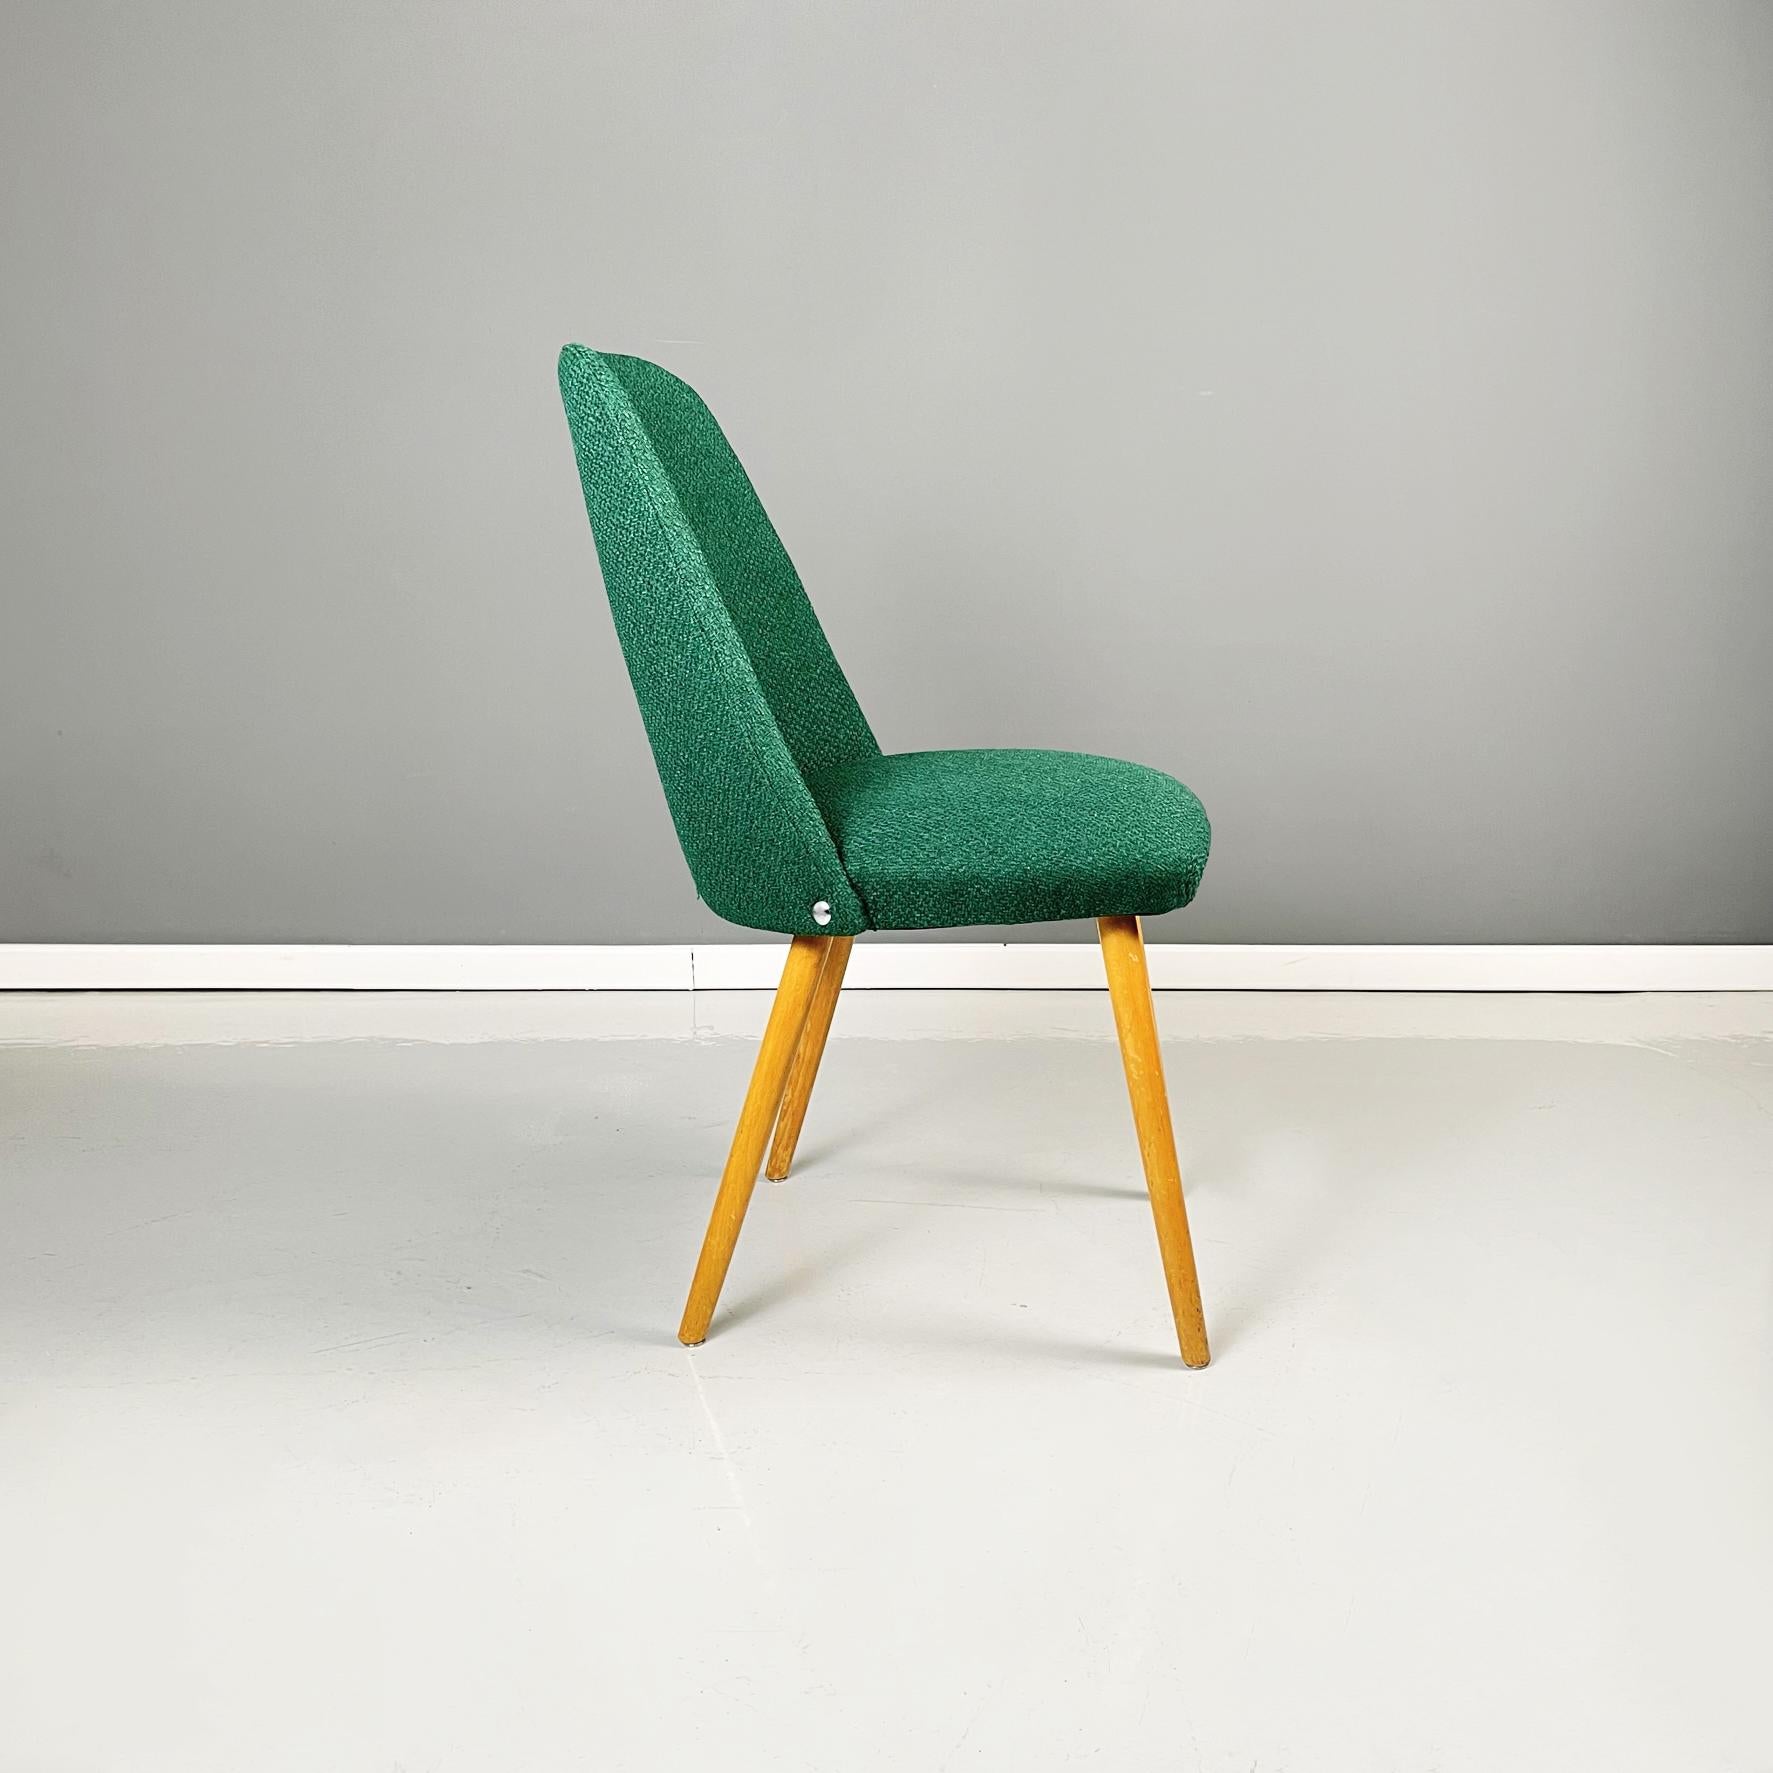 Mid-20th Century Italian Mid-Century Modern Chairs in Forest Green Fabric and Wood, 1960s For Sale